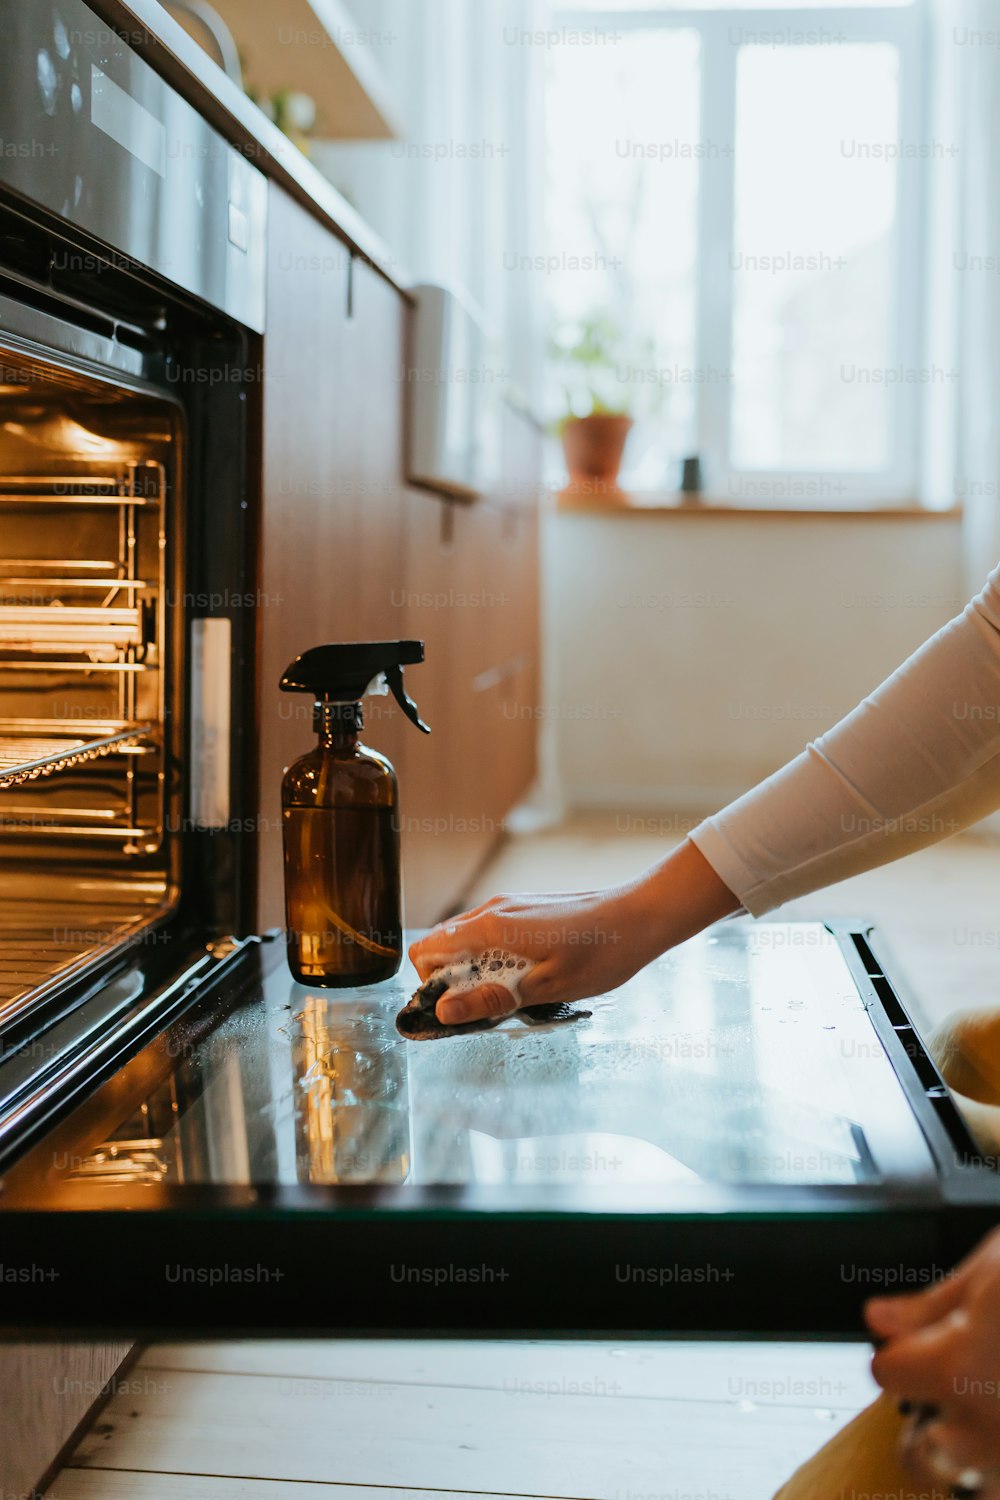 a woman is cleaning the oven with a spray bottle